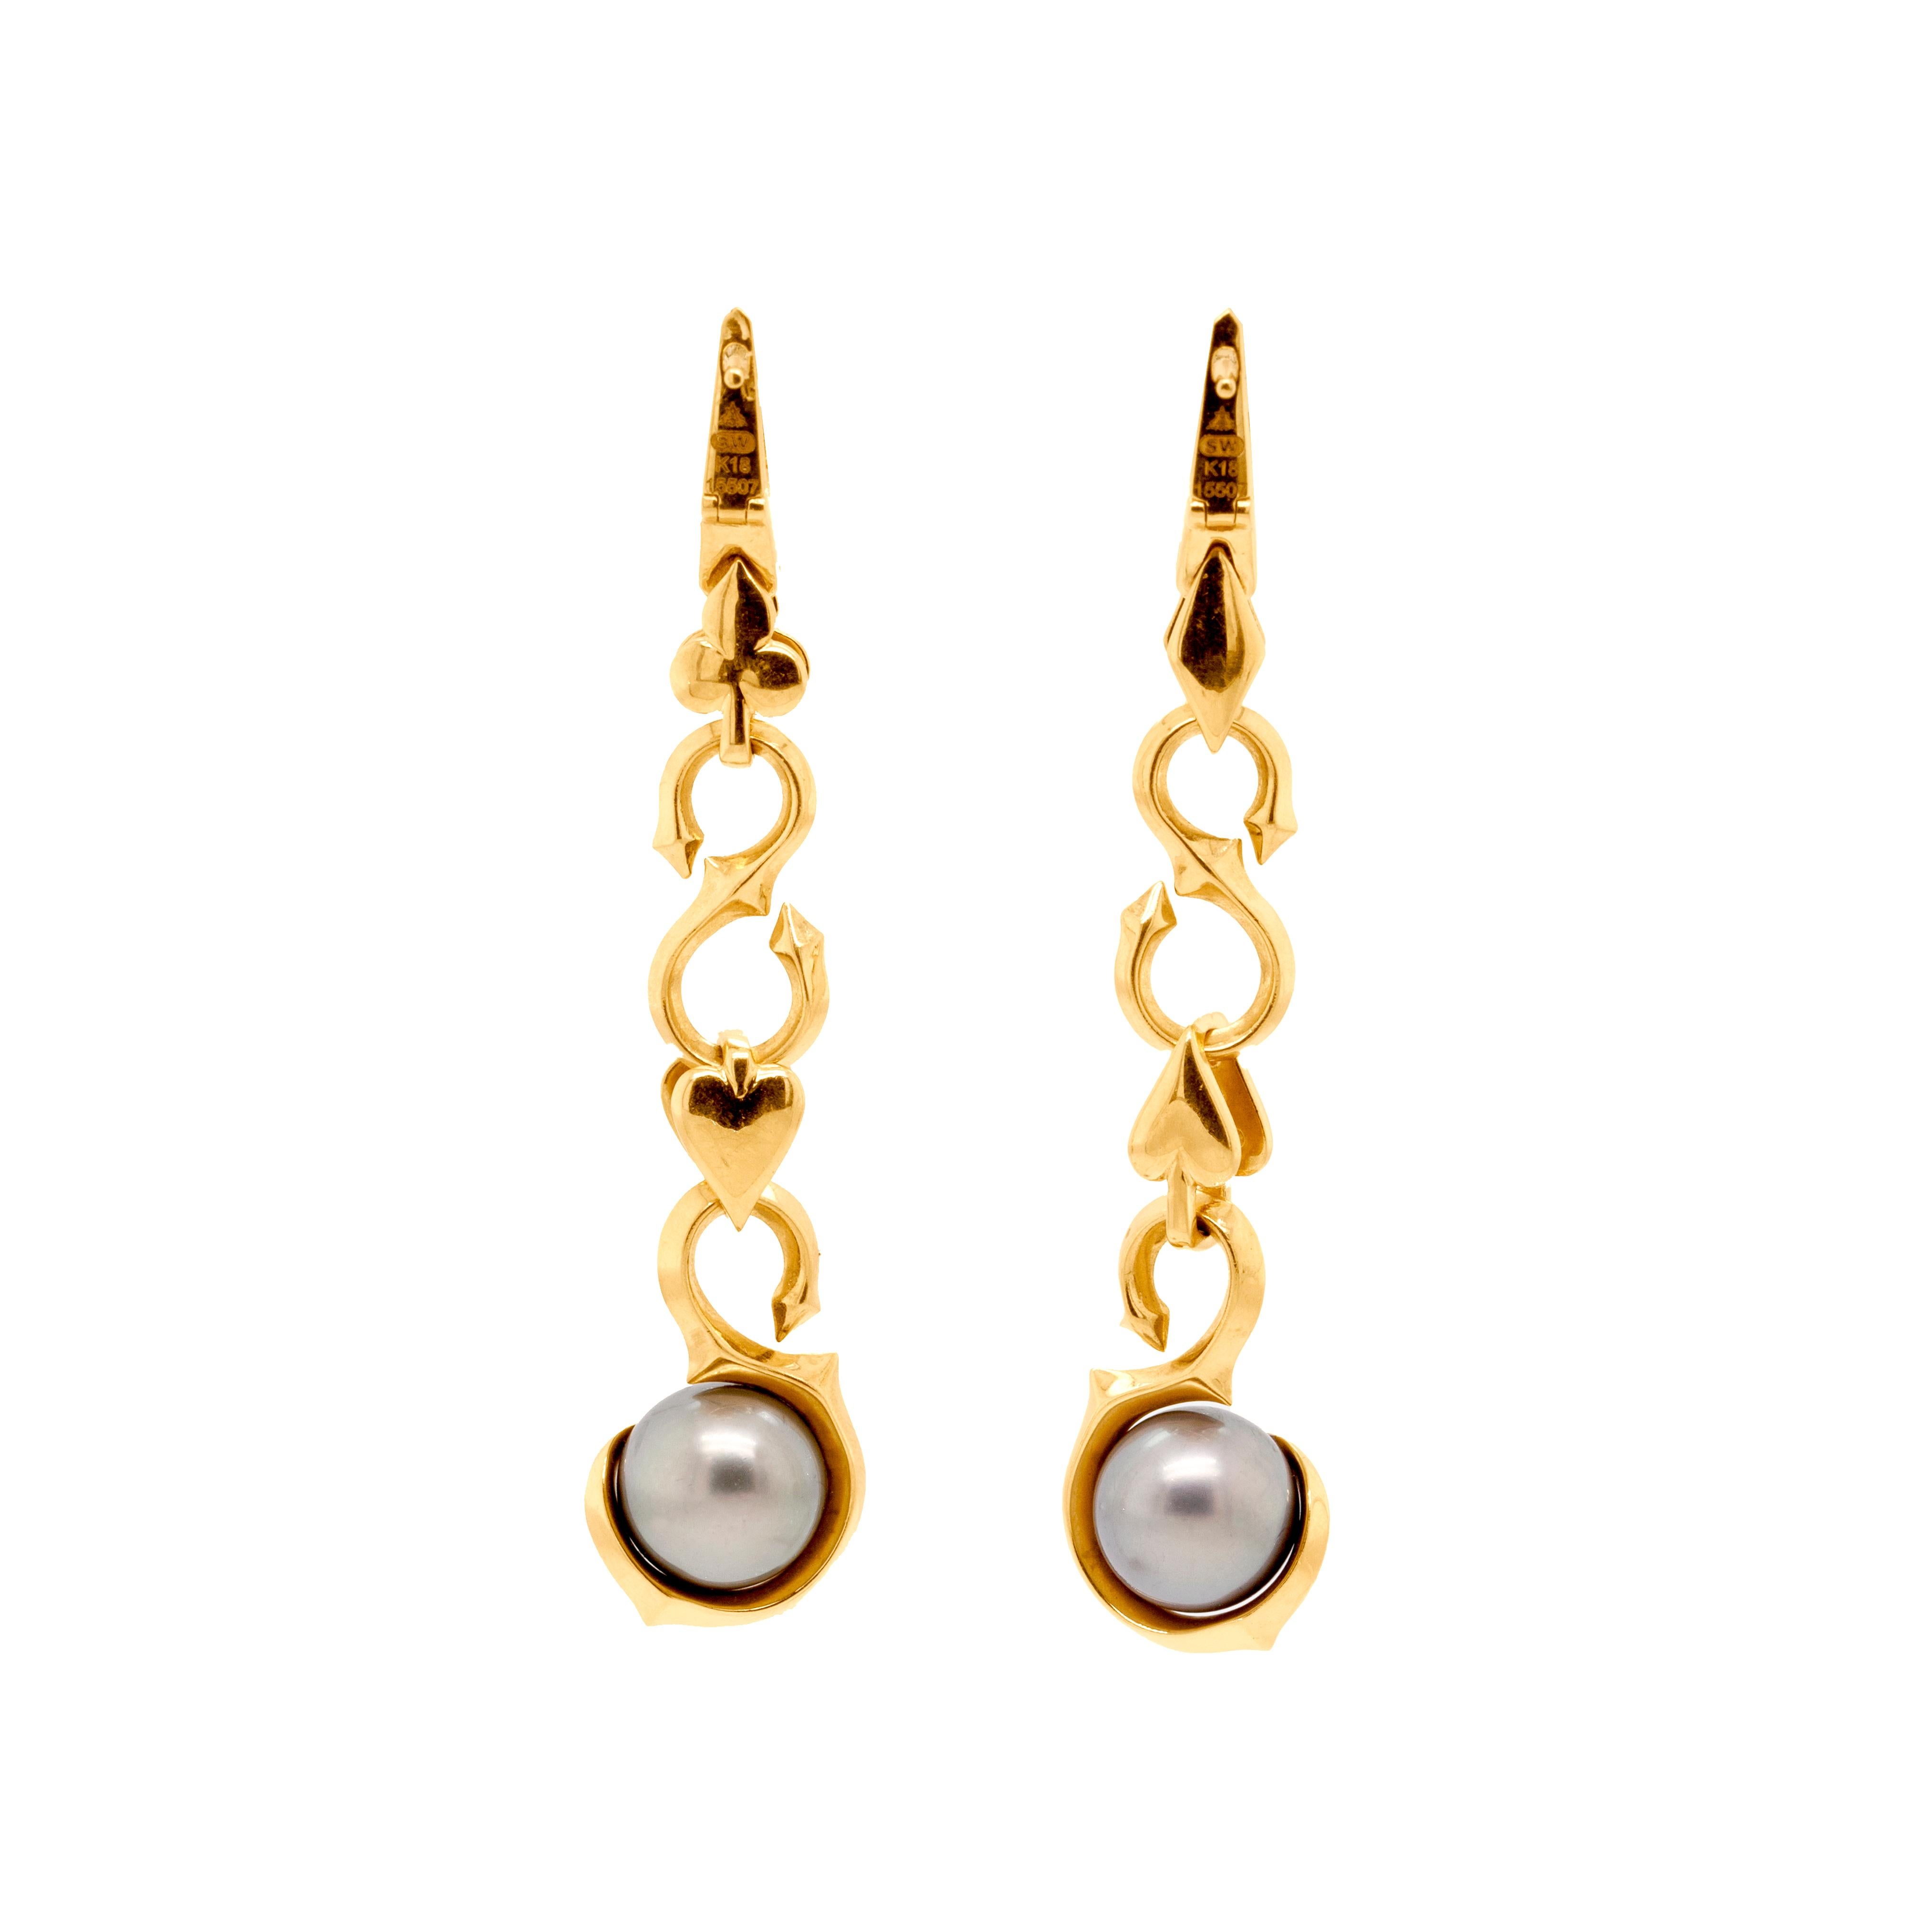 These gorgeous ruby, diamond and Tahitian pearl Stephen Webster drops are the ultimate statement earrings. Crafted out of 18ct yellow gold, these diamond and ruby-set playing card themed earrings are truly unique. 

Seven gorgeous diamonds are grain